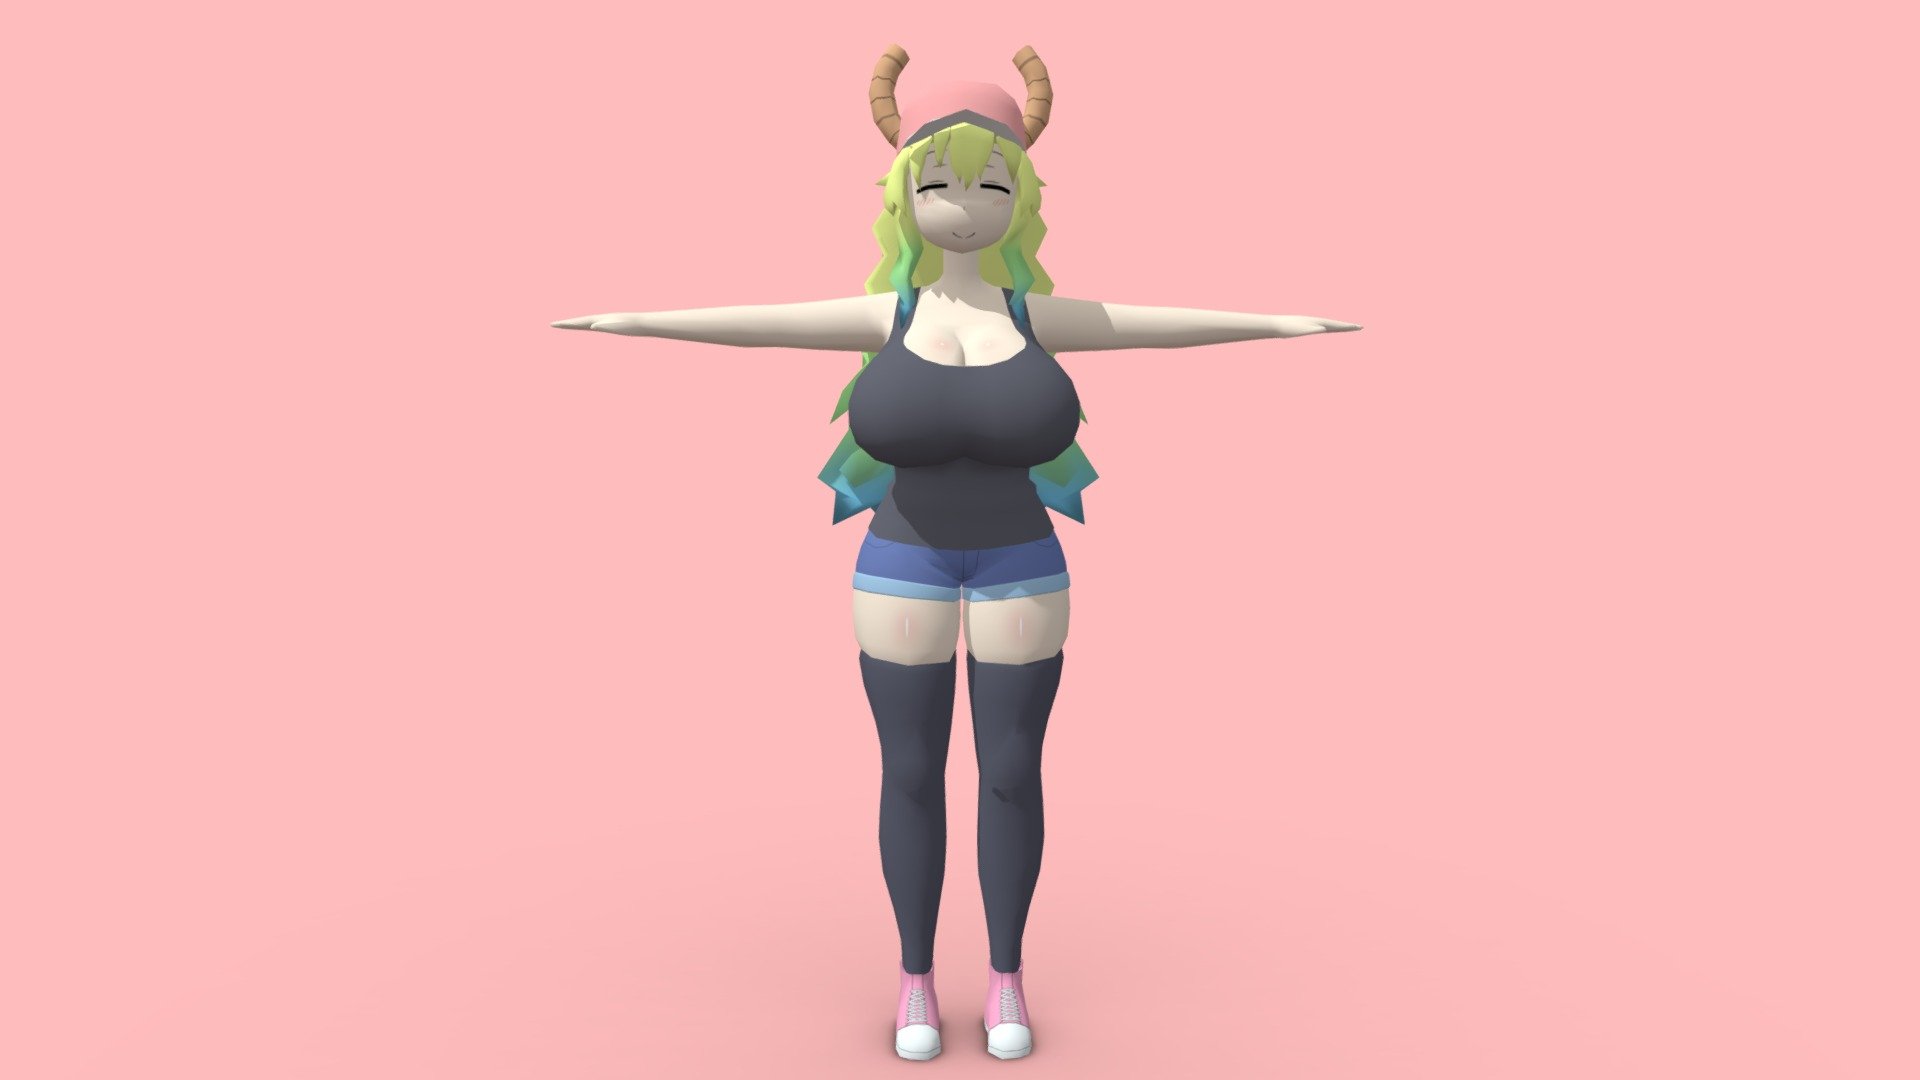 Quetzalcoatl Lucoa from Miss Kobayashi's Dragon Maid.

Also, if you play Cities: Skylines, you can download her from the workshop and have her as a citizen in your city: https://steamcommunity.com/sharedfiles/filedetails/?id=2298506170 - Quetzalcoatl Lucoa - 3D model by Nosh59 3d model